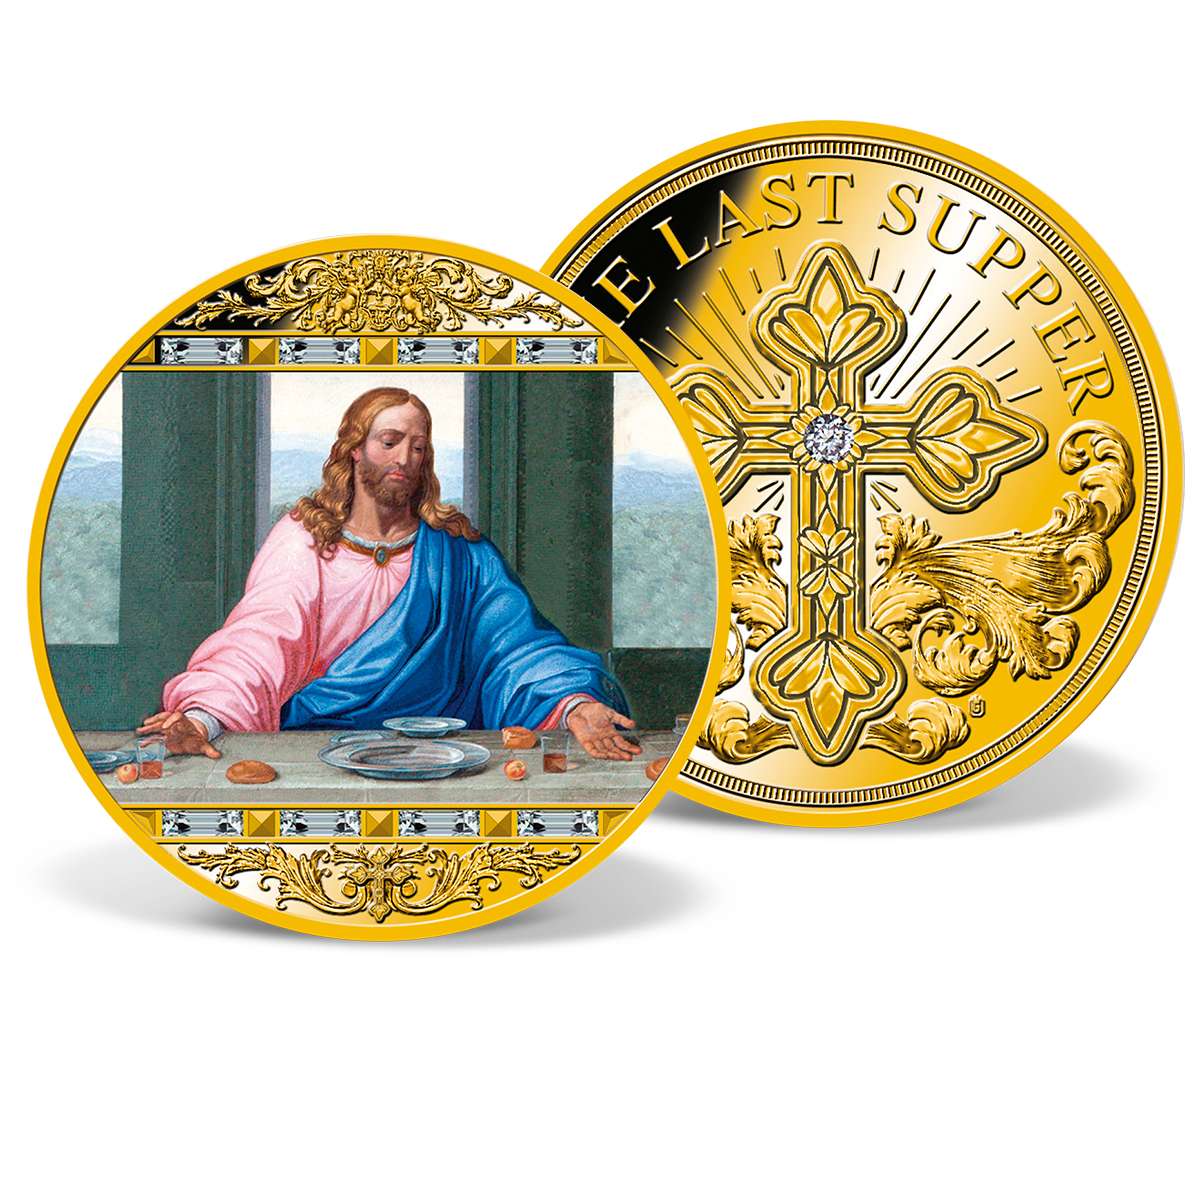 Jesus last supper commemorative coin collection collectible christmas giftBLIS 